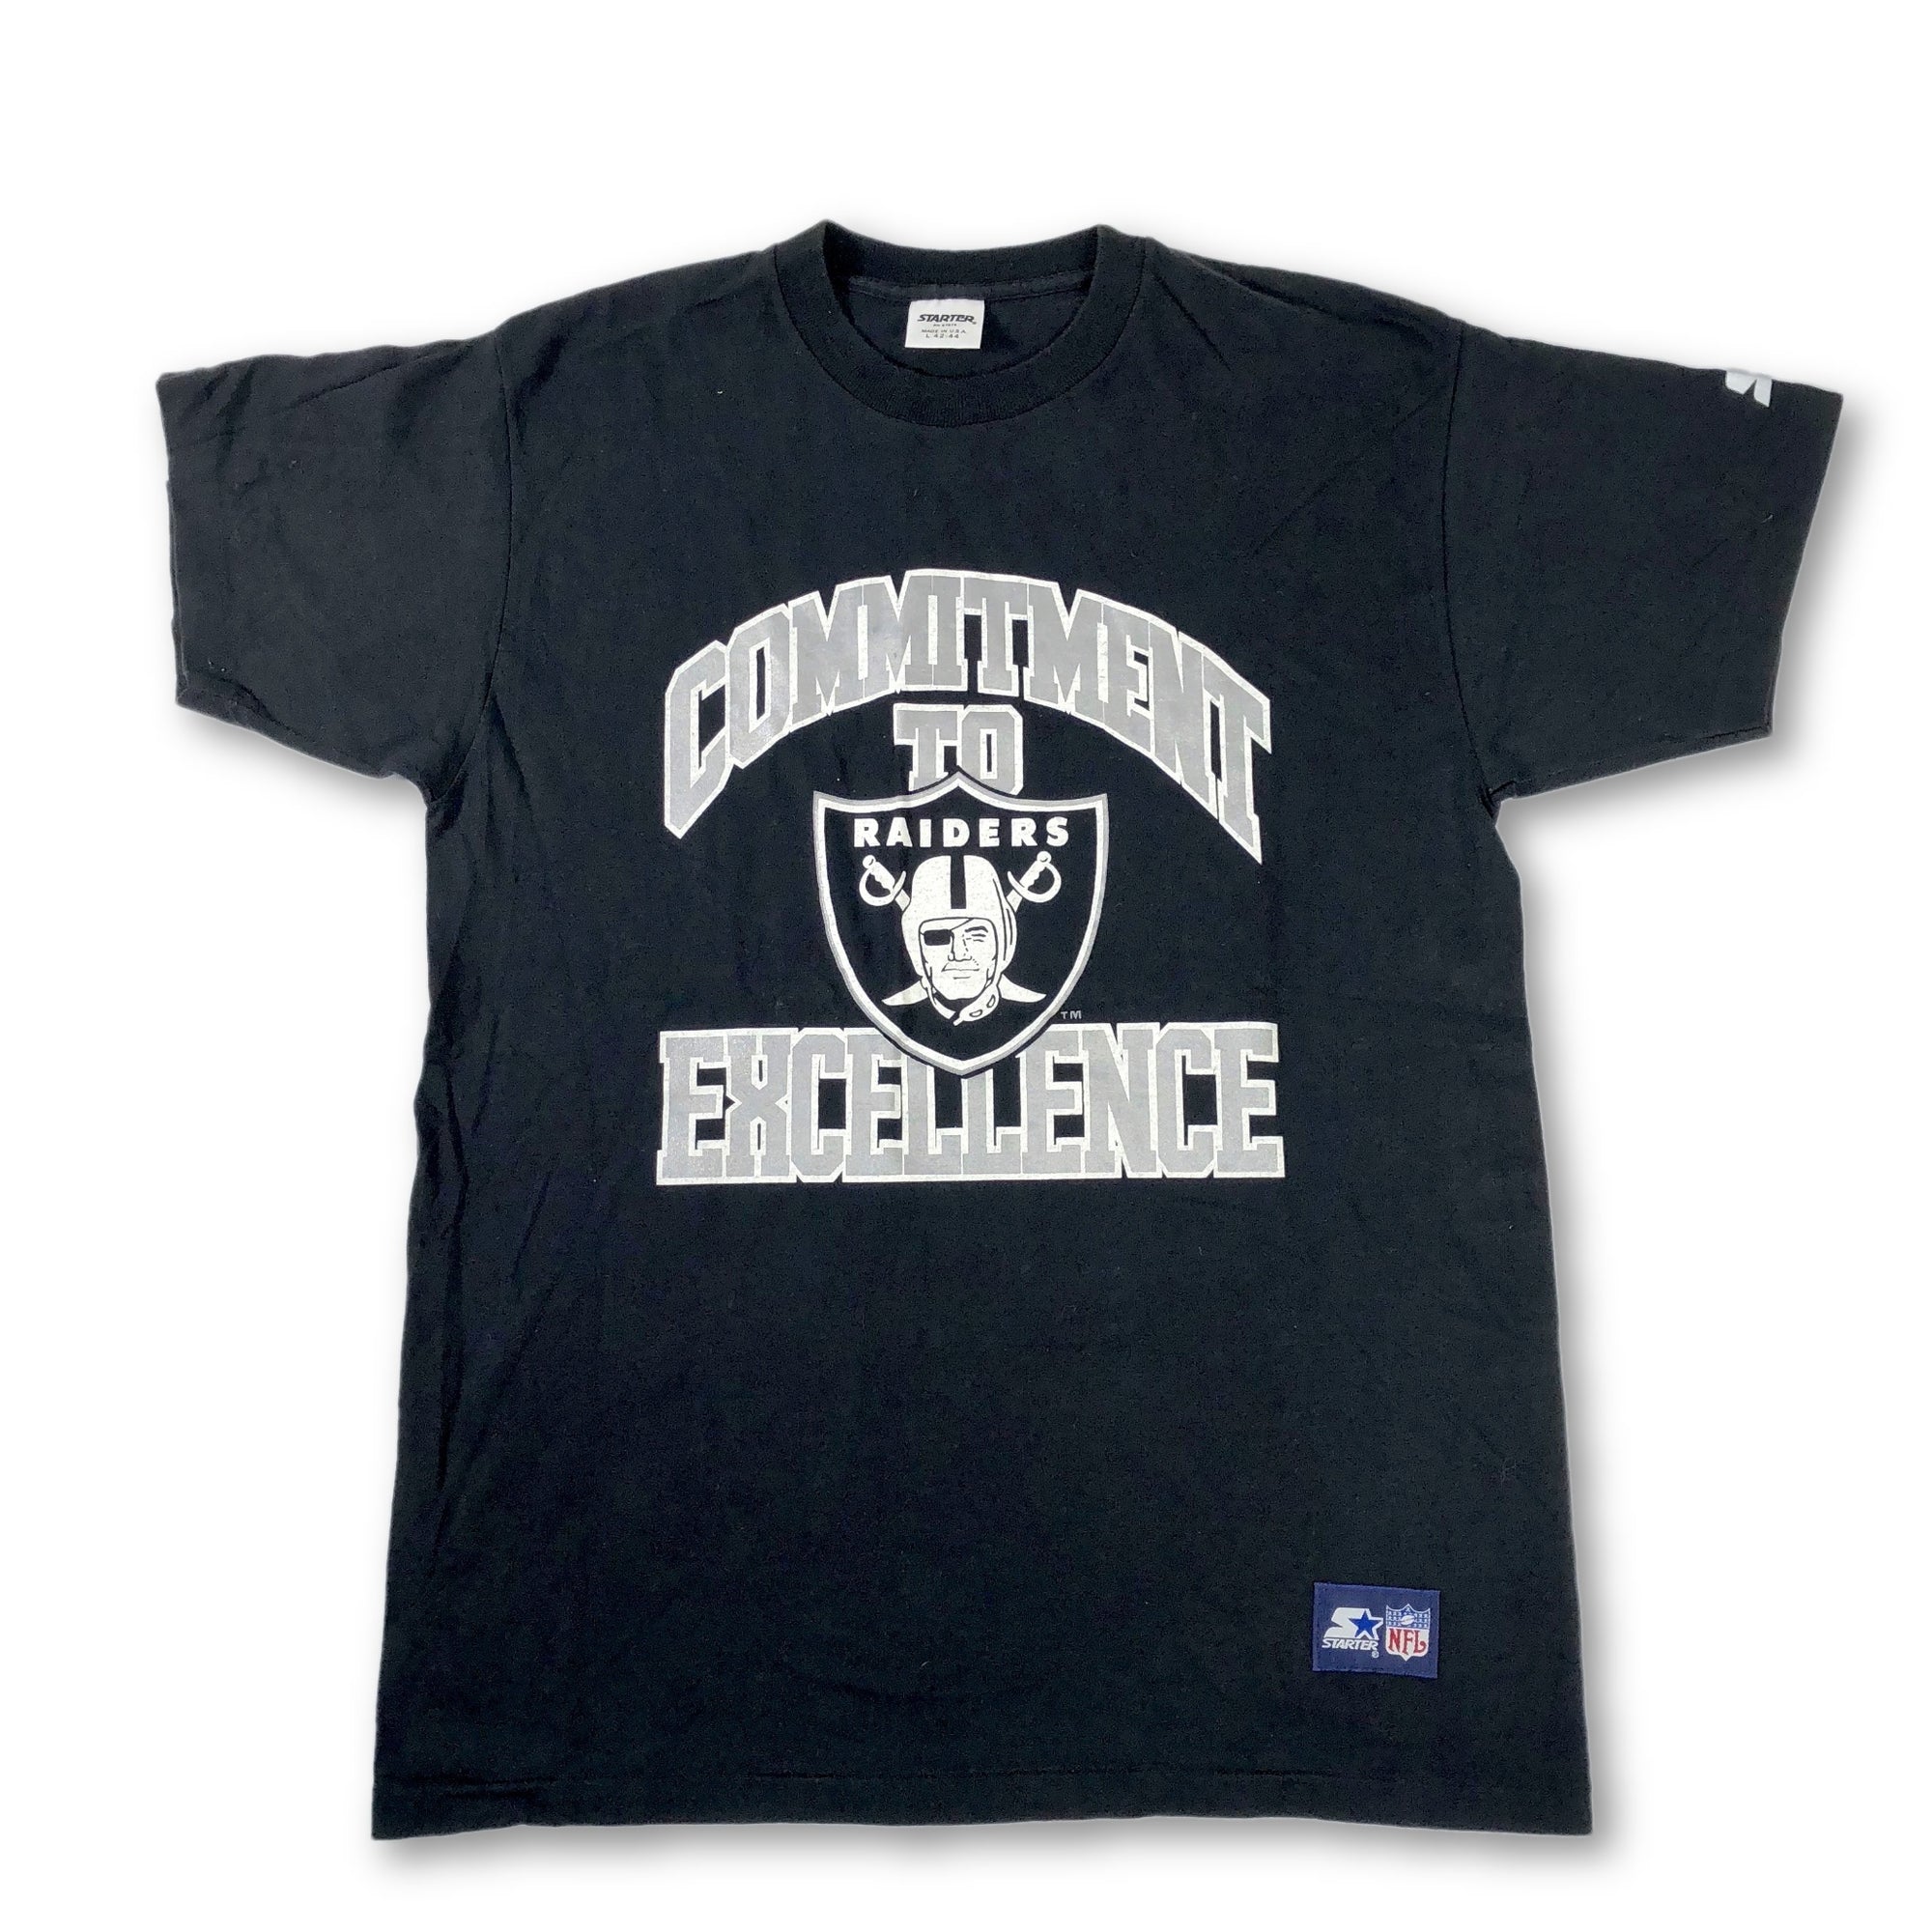 Vintage Oakland Raiders "Commitment to Excellence" Starter T-Shirt - jointcustodydc